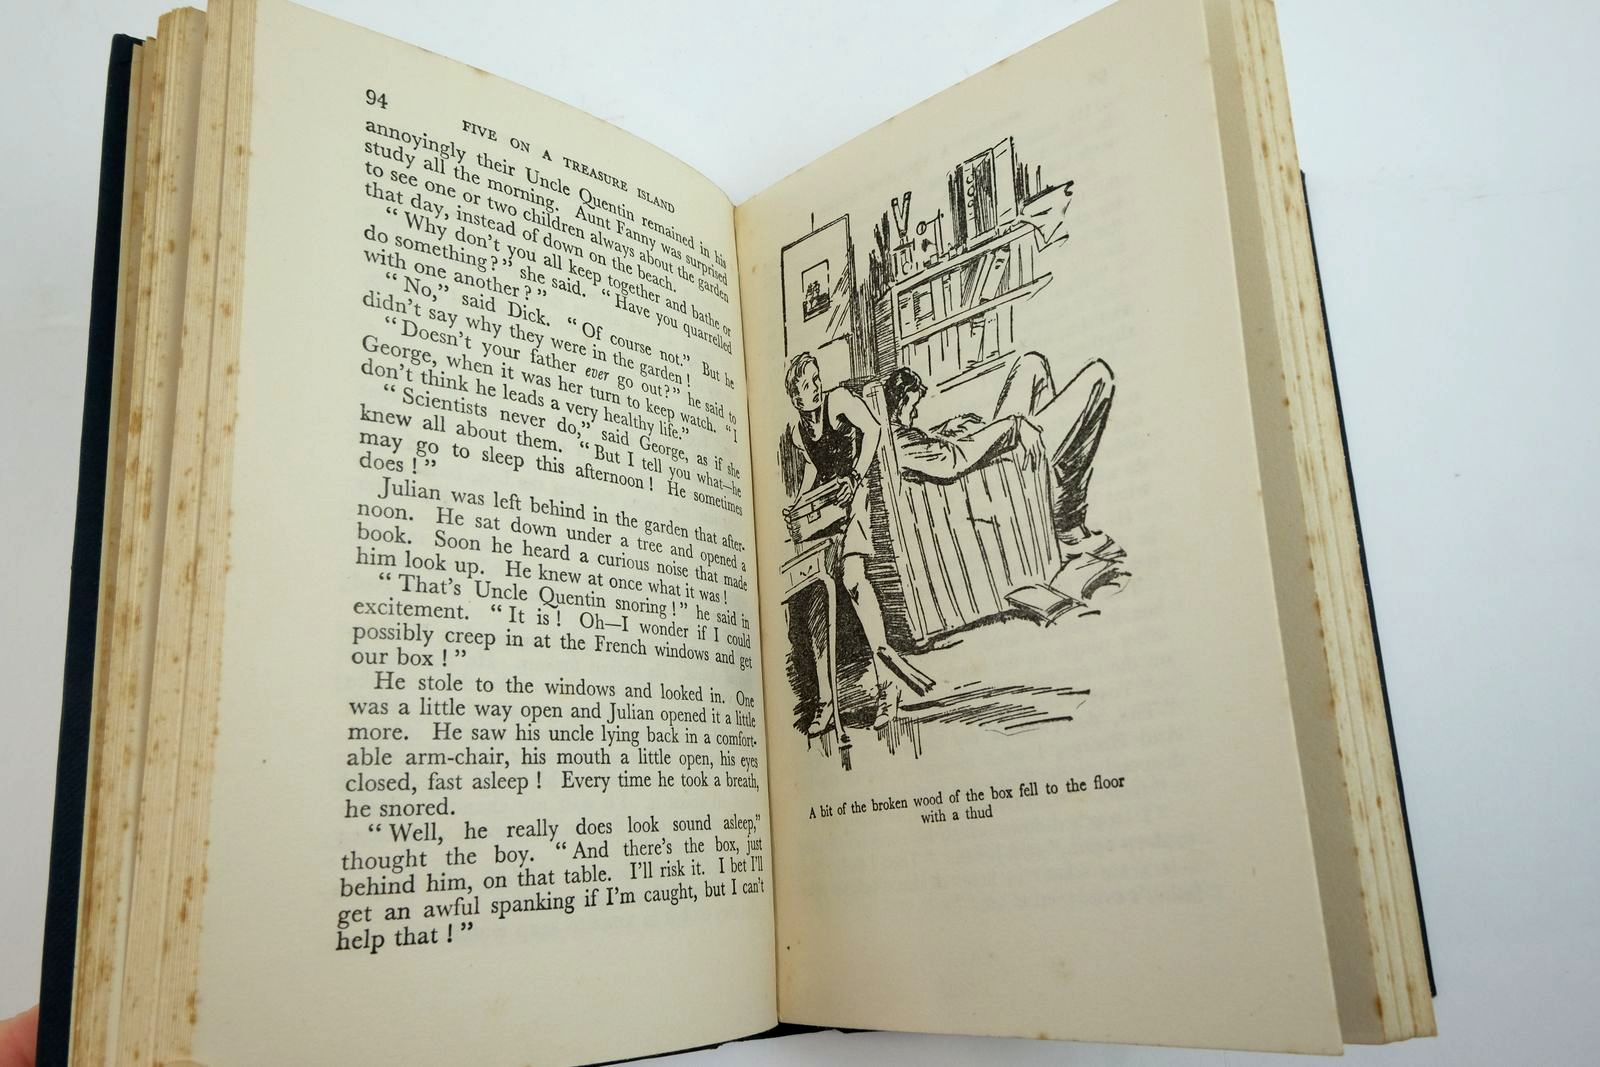 Photo of FIVE ON A TREASURE ISLAND written by Blyton, Enid illustrated by Soper, Eileen published by Hodder & Stoughton (STOCK CODE: 2135596)  for sale by Stella & Rose's Books